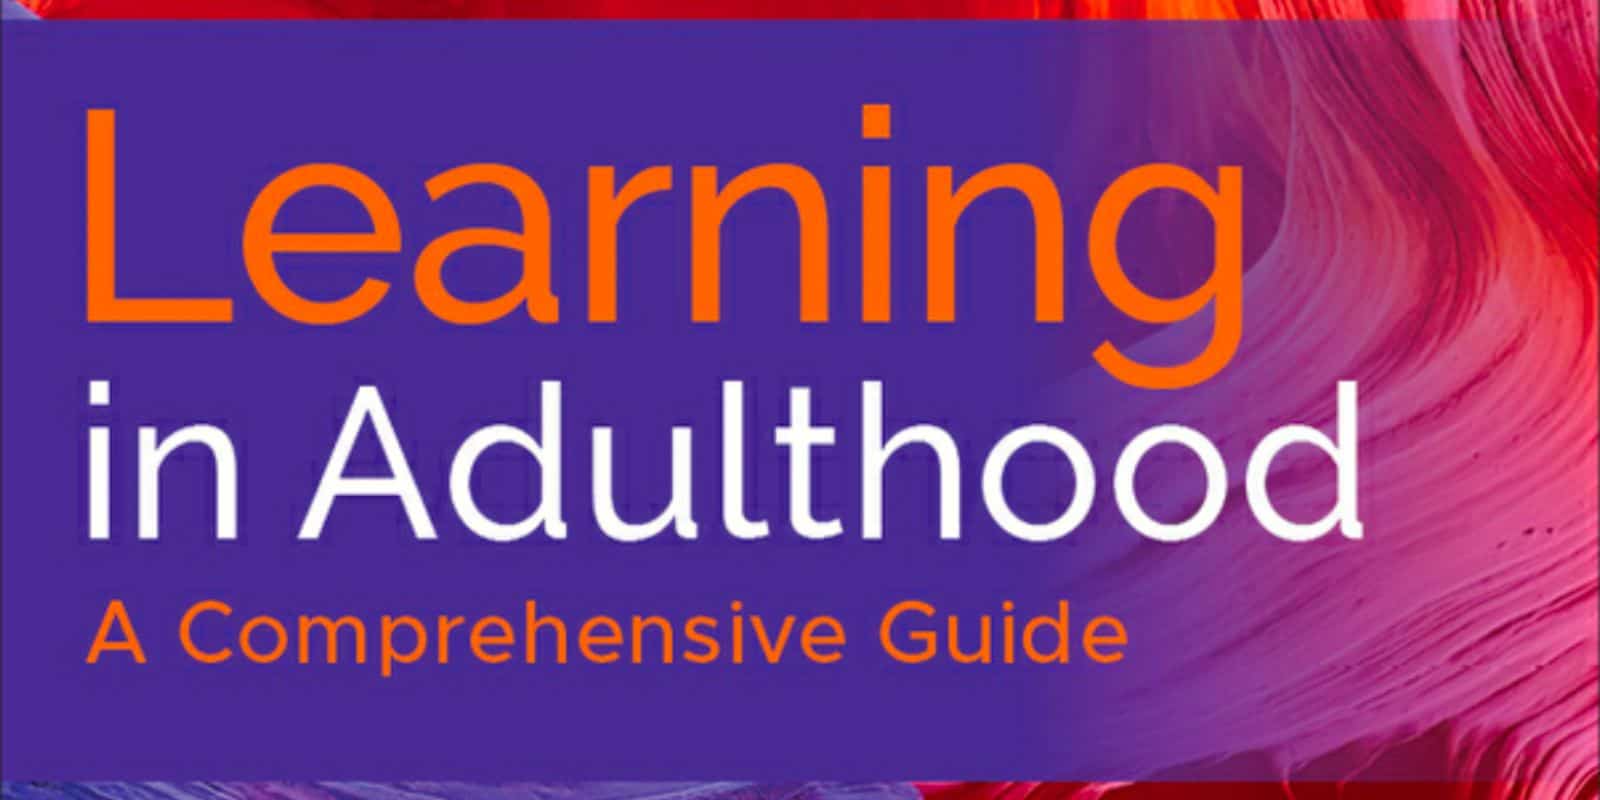 Learning in Adulthood